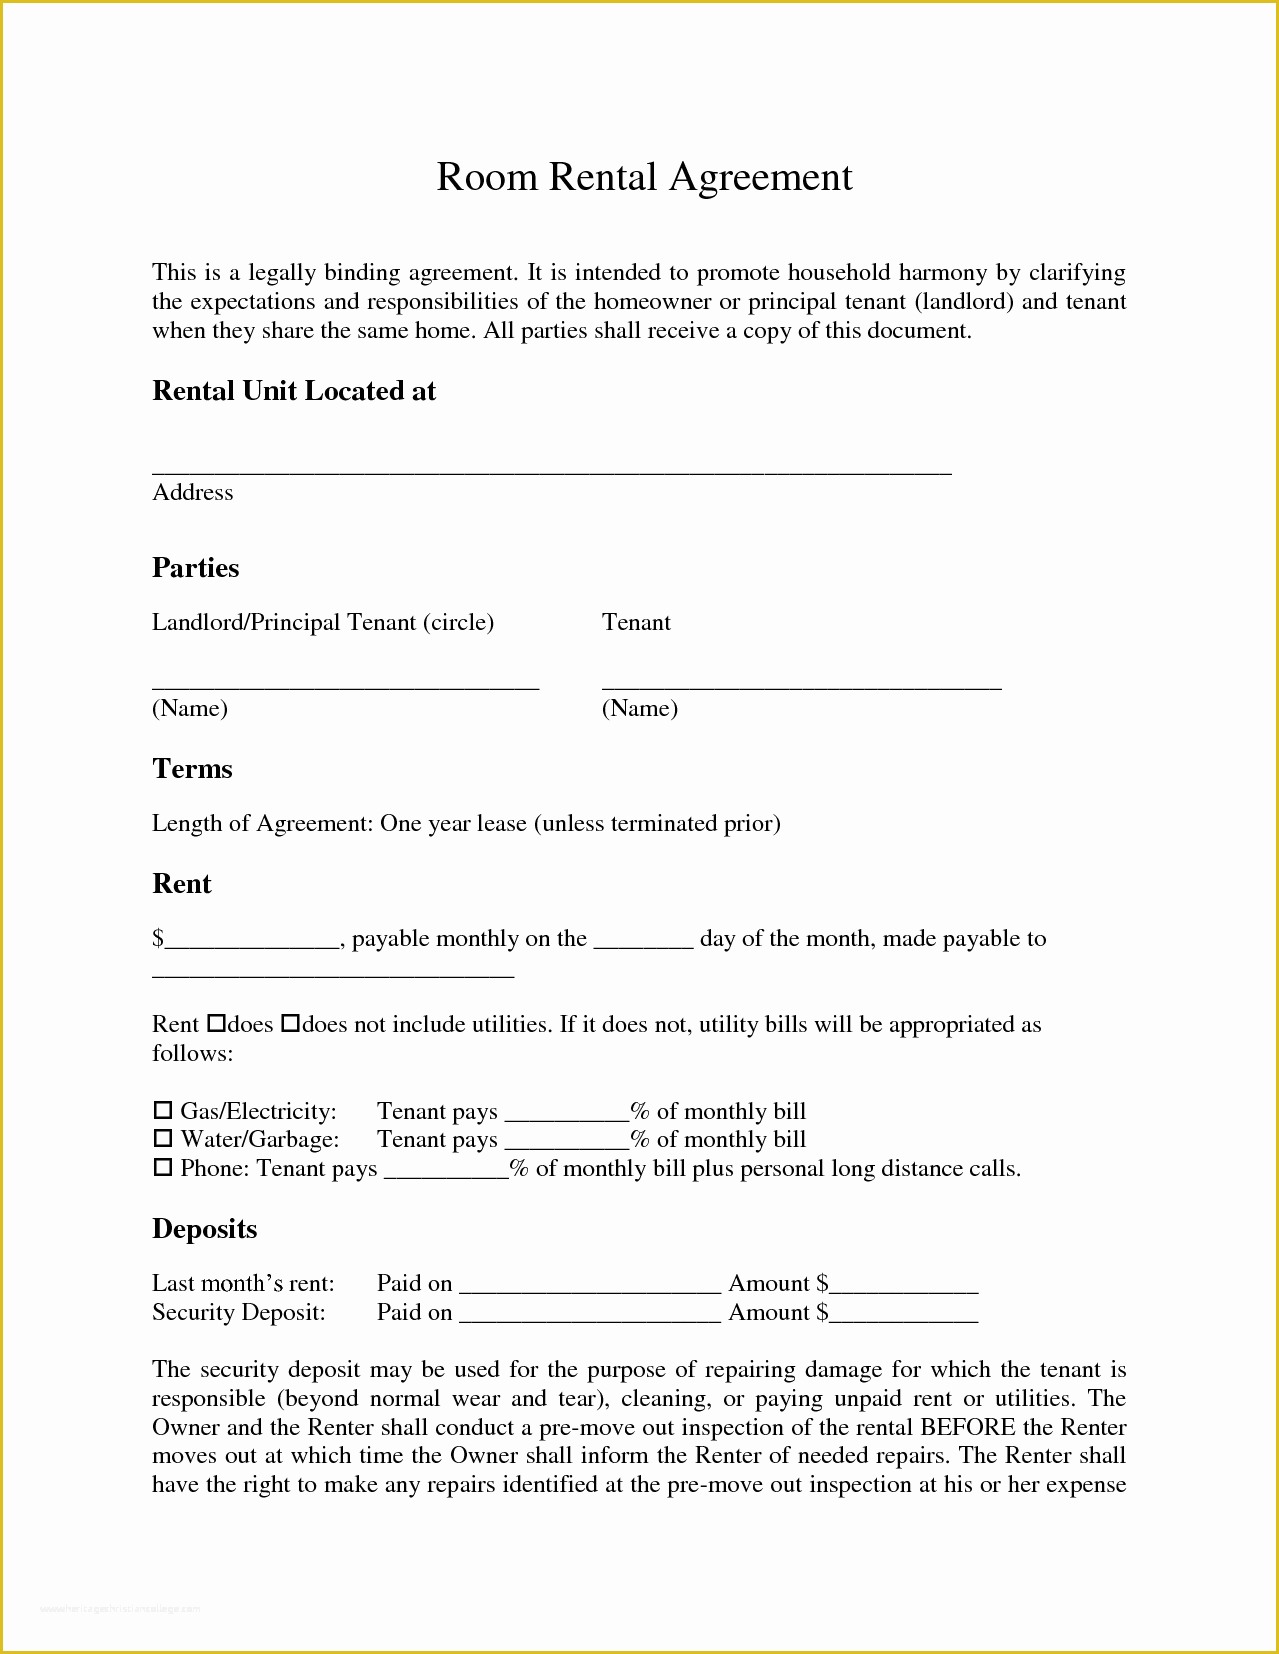 Free Month to Month Rental Agreement Template Of 3 Room Lease Agreement Template